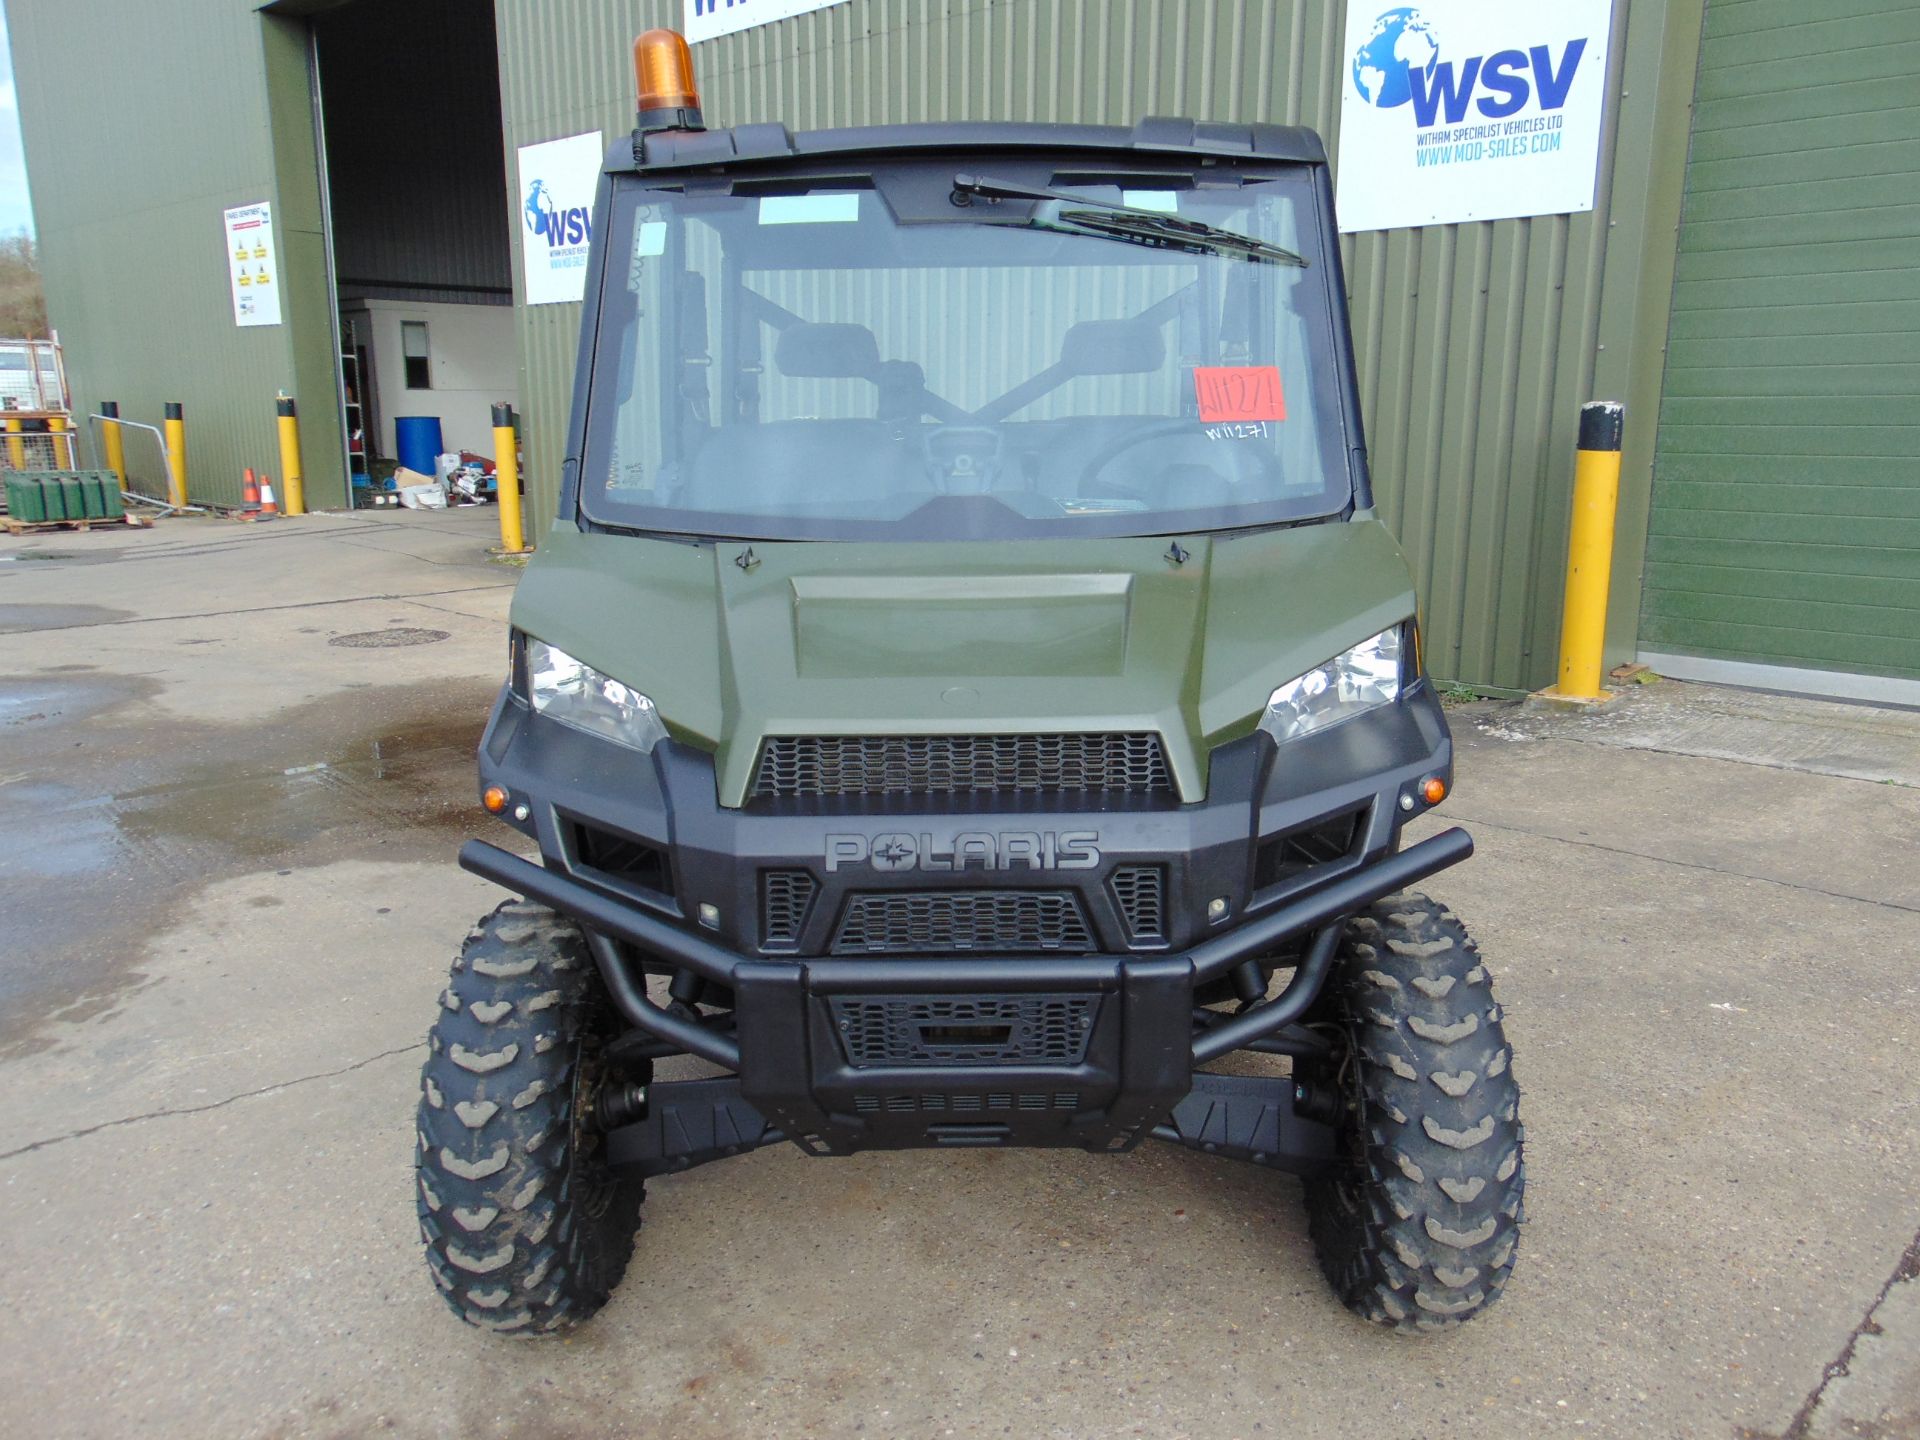 Polaris Ranger Crew Cab Diesel Utility Vehicle 1,190 Hrs only from Govt Dept - Image 3 of 25